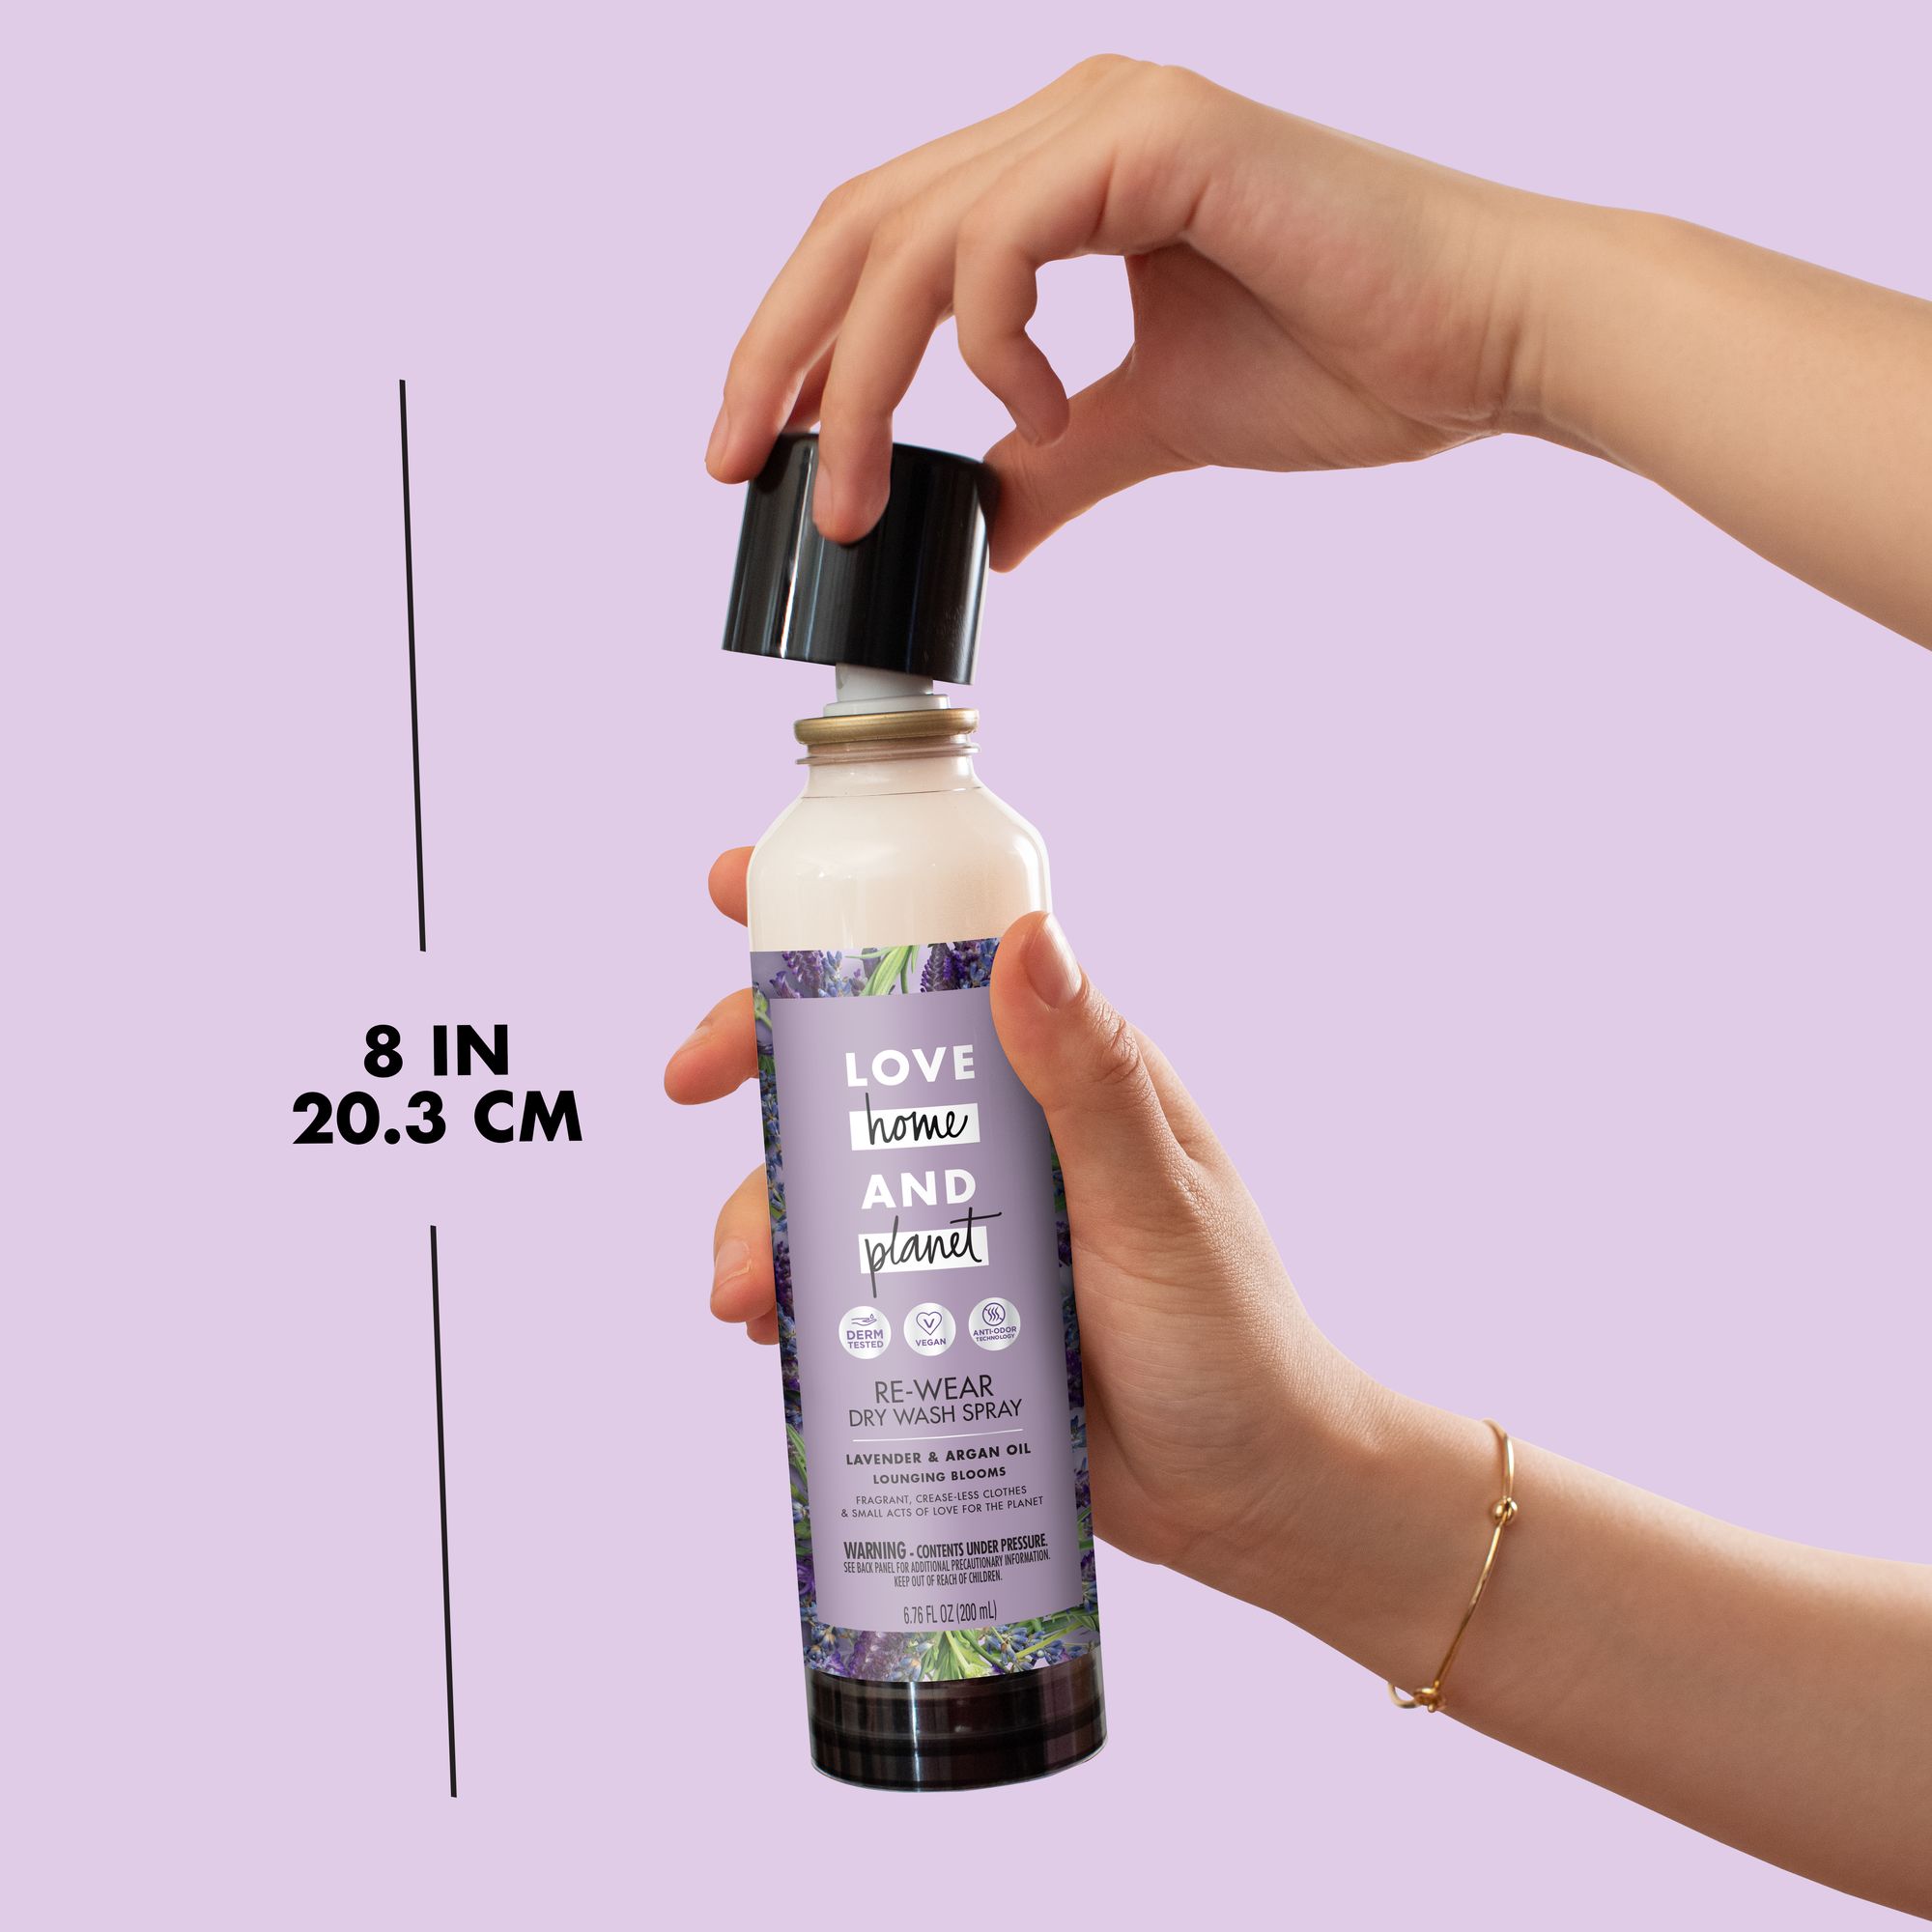 Love Home and Planet Dry Wash Spray Lavender & Argan Oil 6.7 oz - image 4 of 8